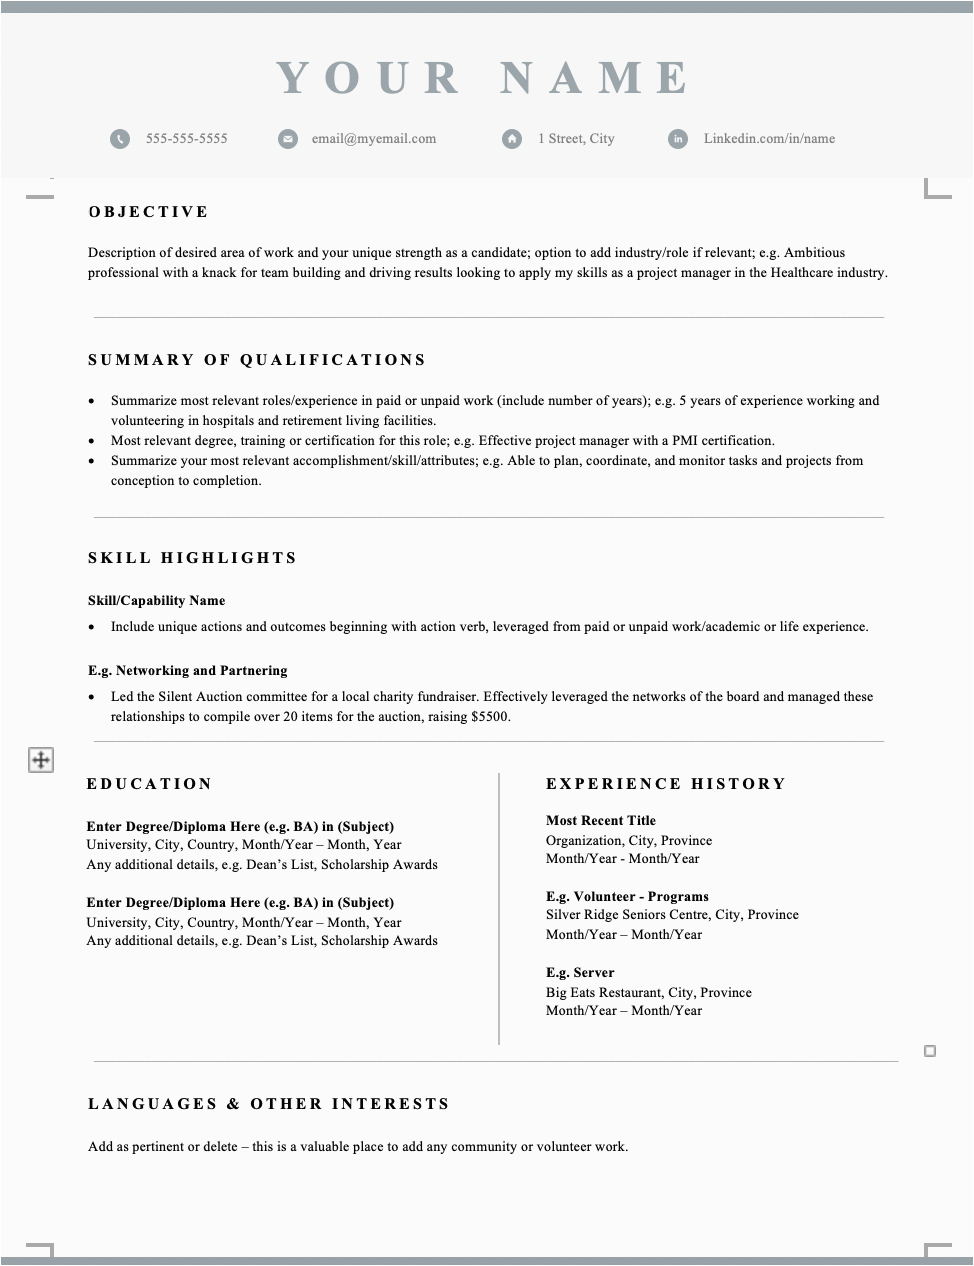 Sample Resumes for Jobs In Canada Resume format for Job In Canada Writing An Effective Resume for Job